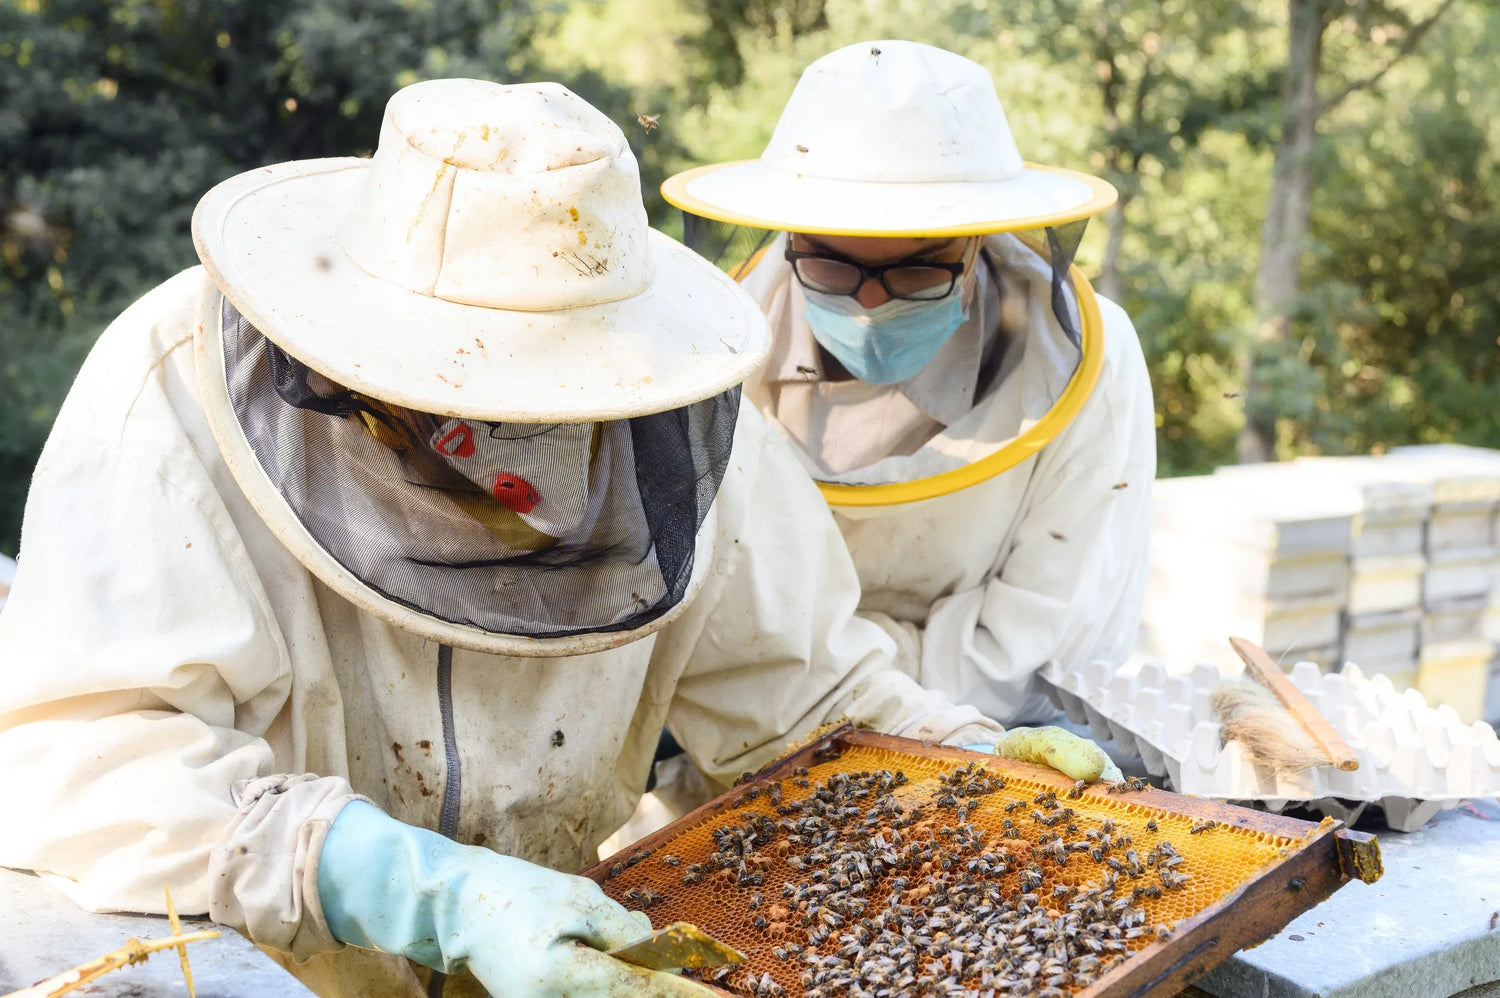 two-beekeepers-in-protective-gear-inspecting-honeycomb-frame-outdoors